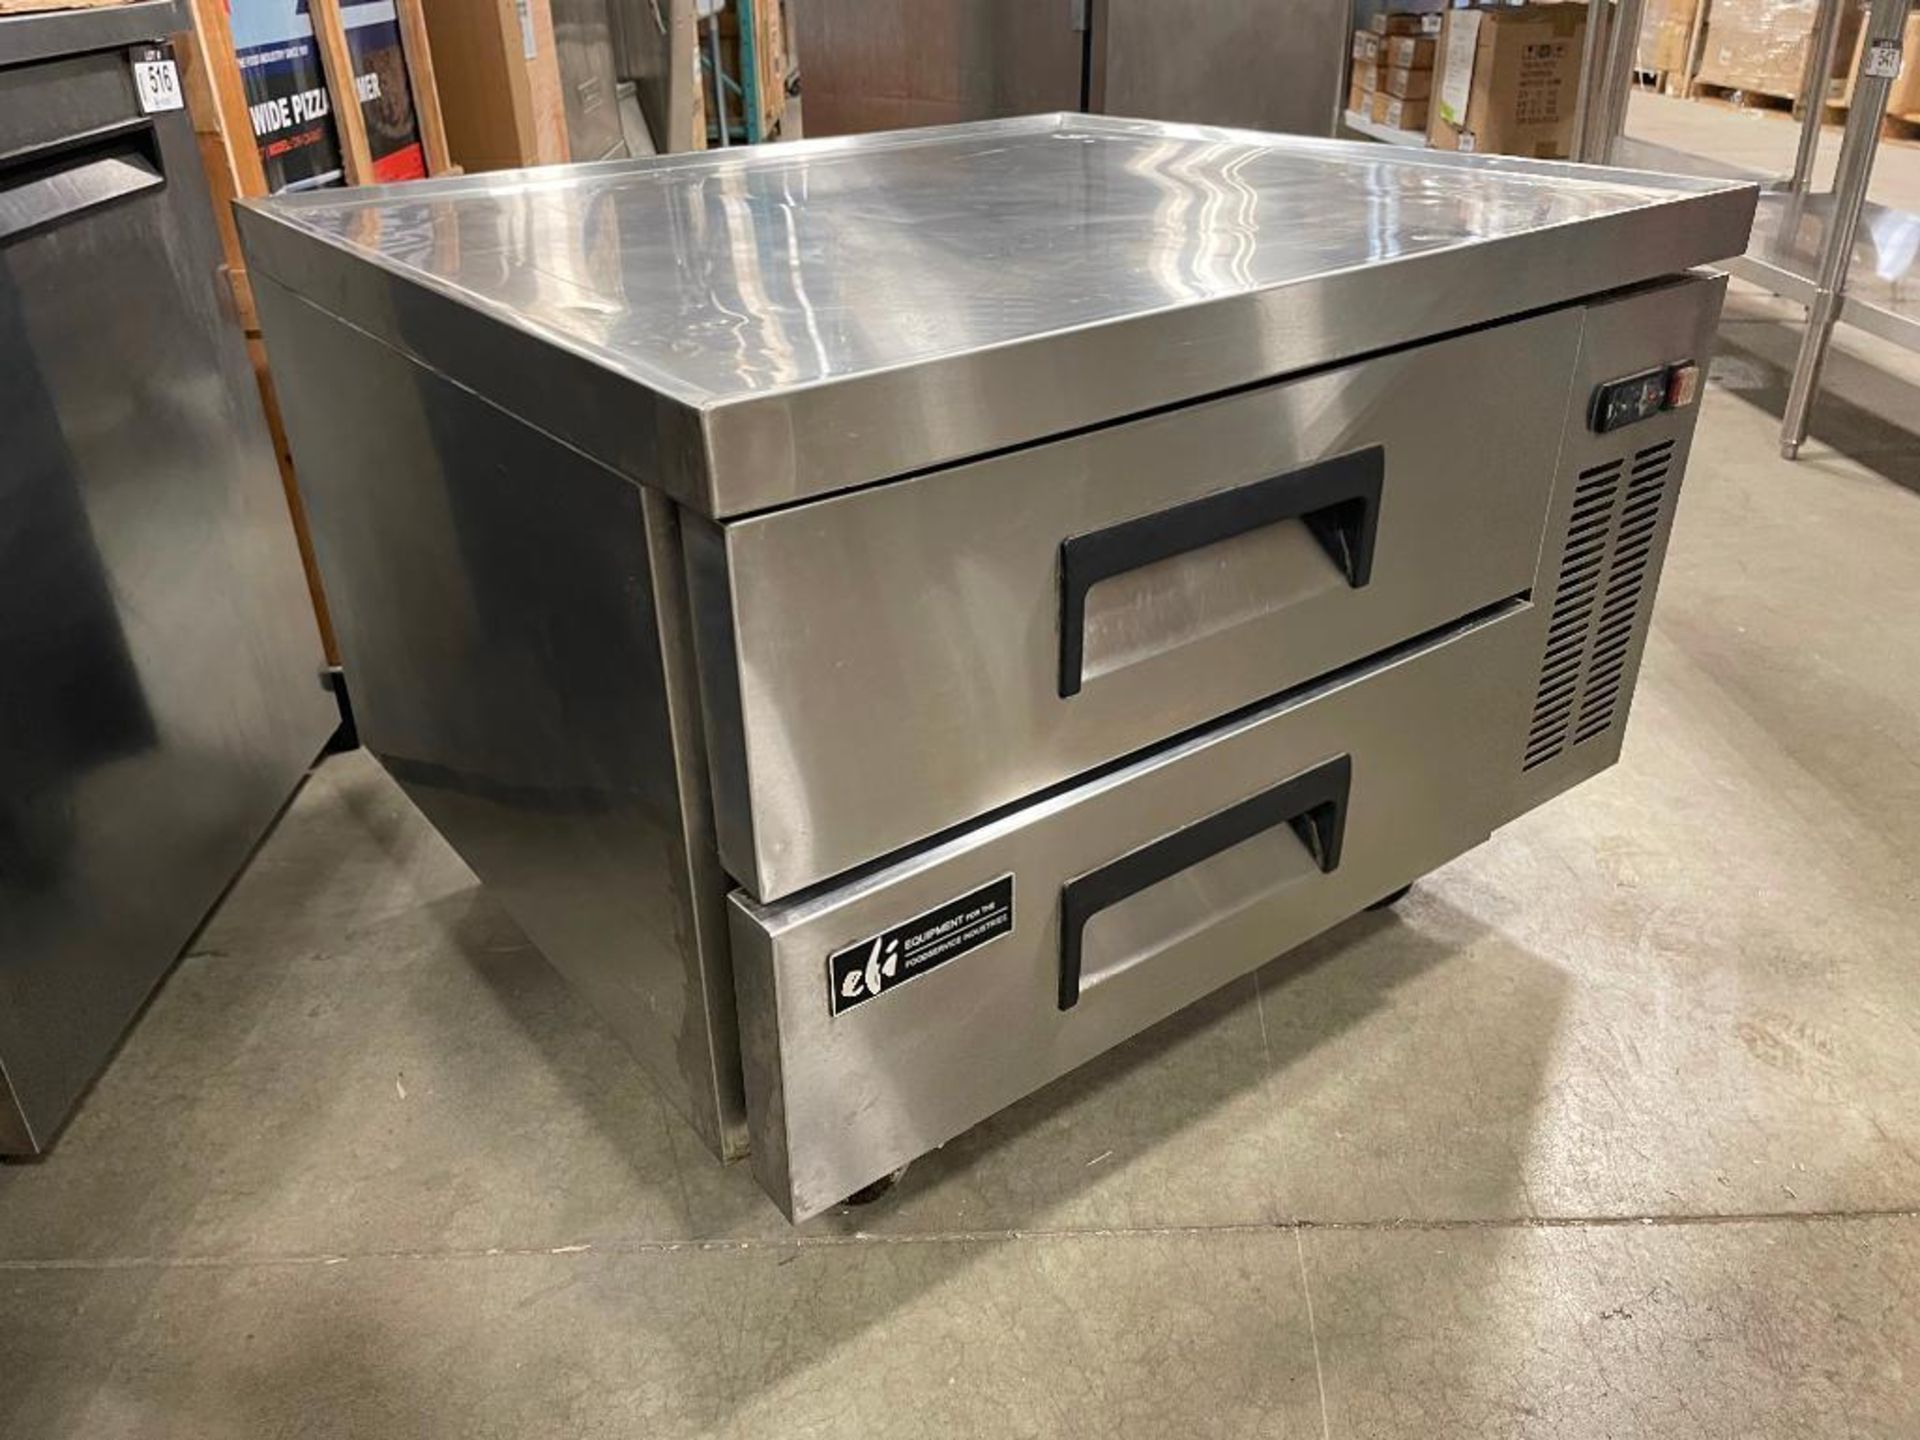 EFI CCB-36 - 36.4" TWO DRAWER REFRIGERATED CHEF BASE